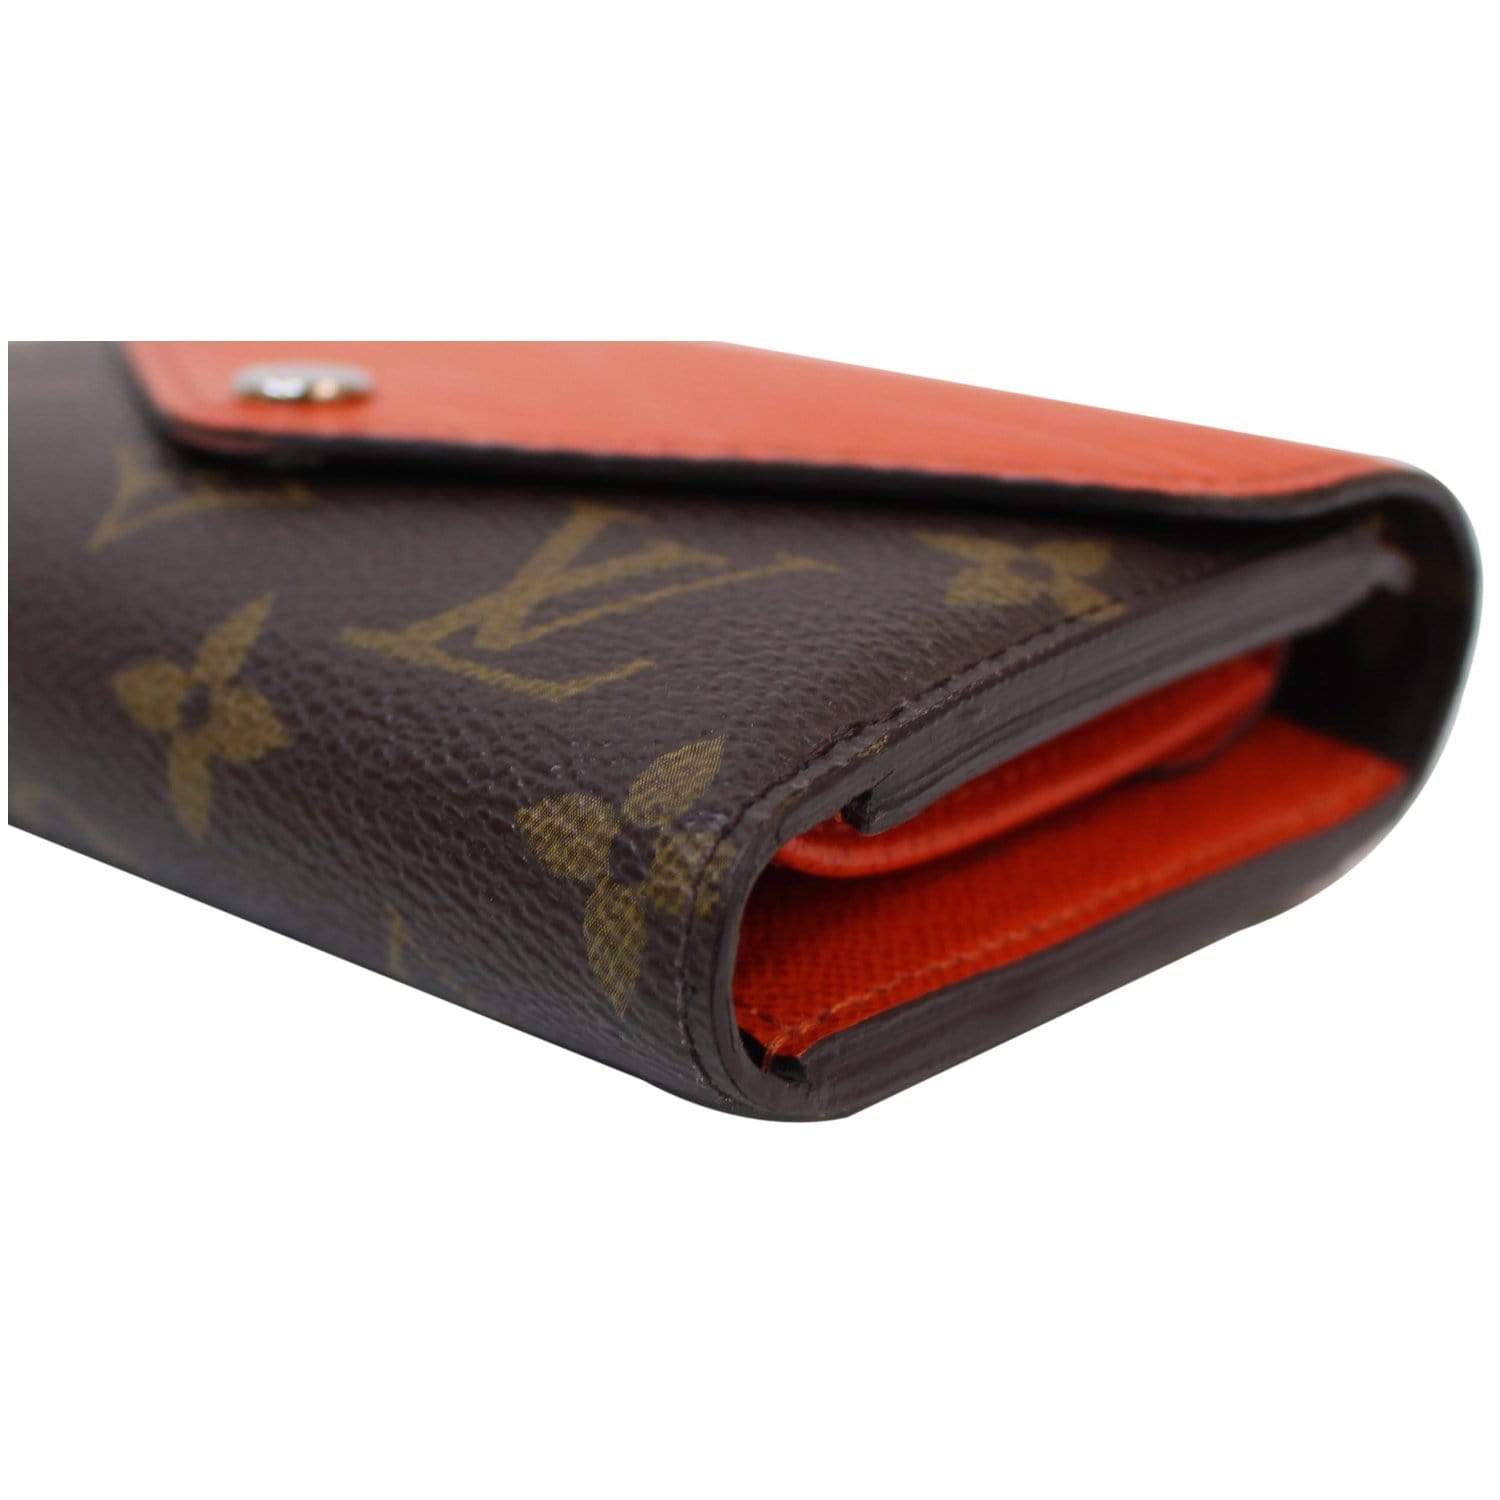 Lou Wallet Monogram Canvas - Wallets and Small Leather Goods